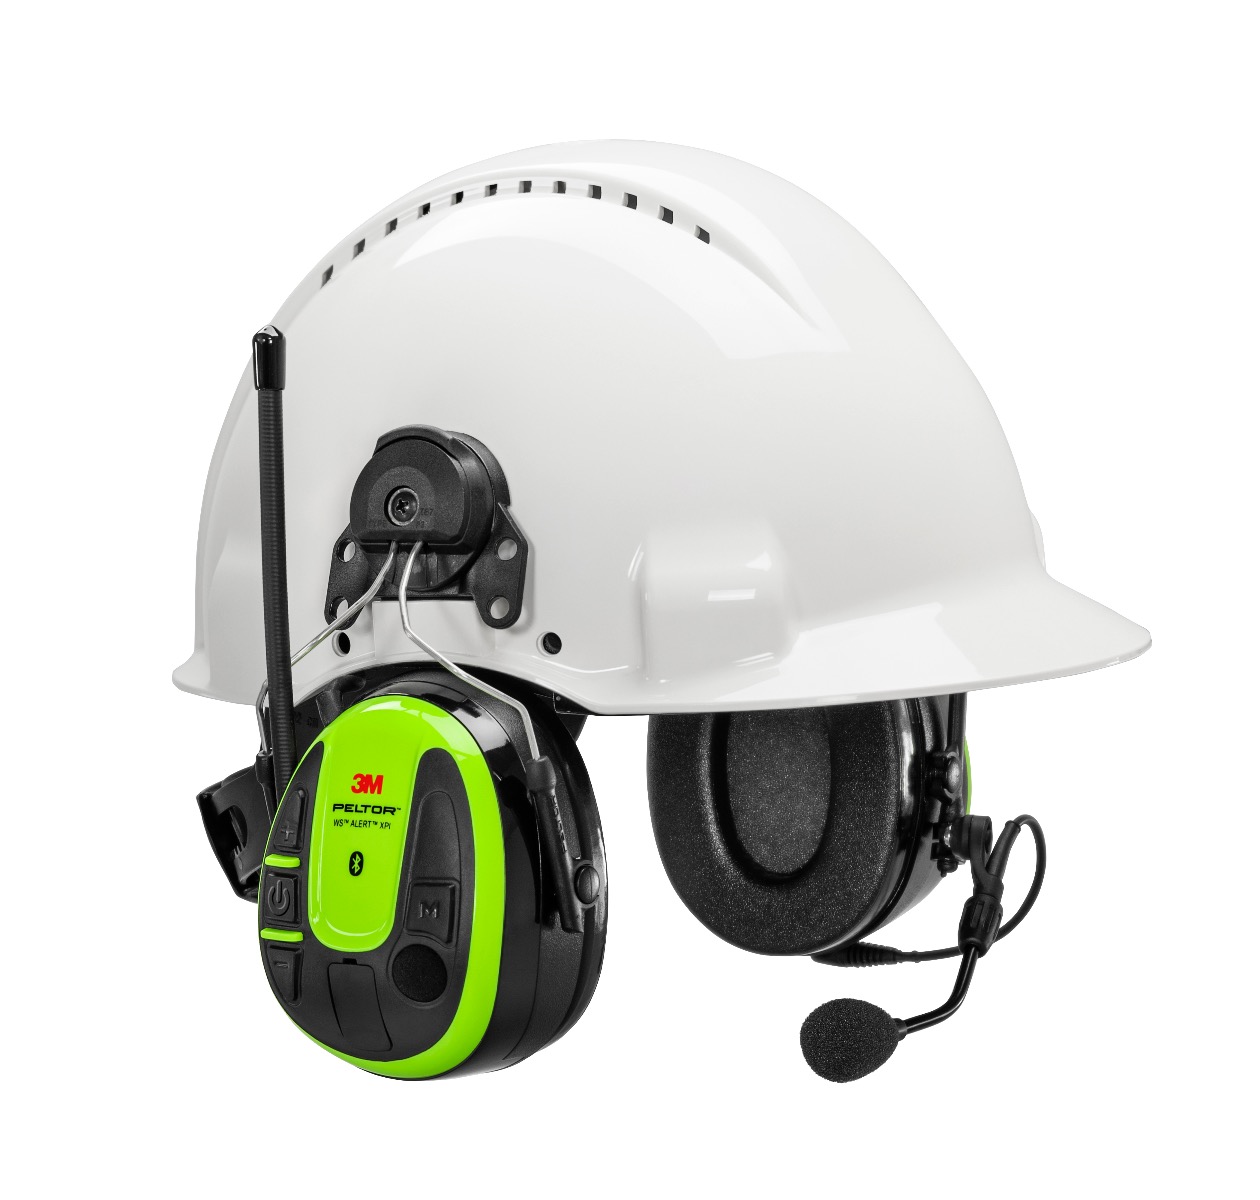 3M XP1 Helmet Attachment Ear Muffs now have an App, making them even quicker to use